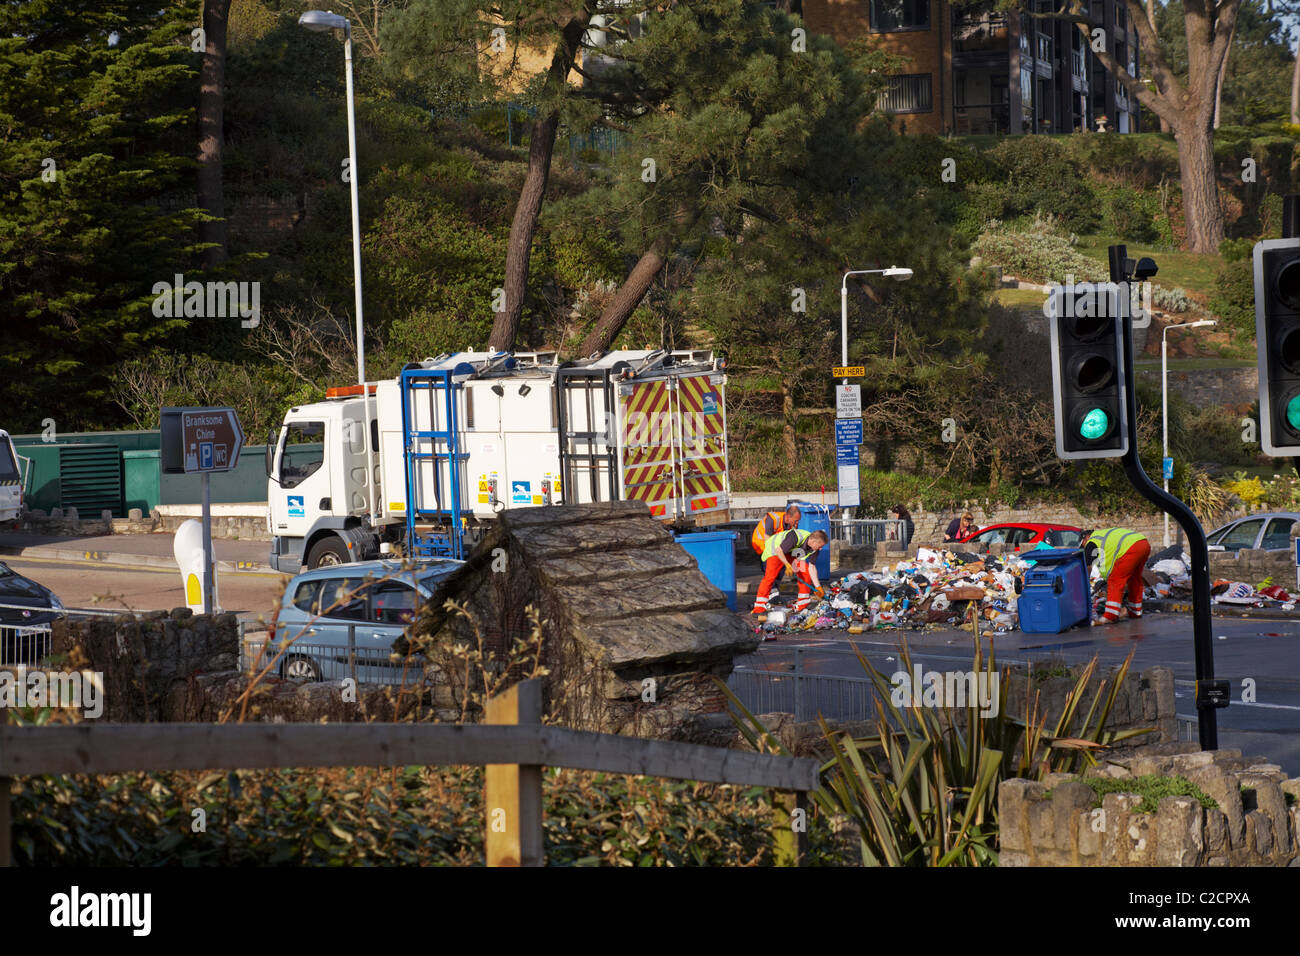 Council workers clearing up piles of rubbish in road with wheelie bins upturned following an incident at Branksome Chine, April Stock Photo